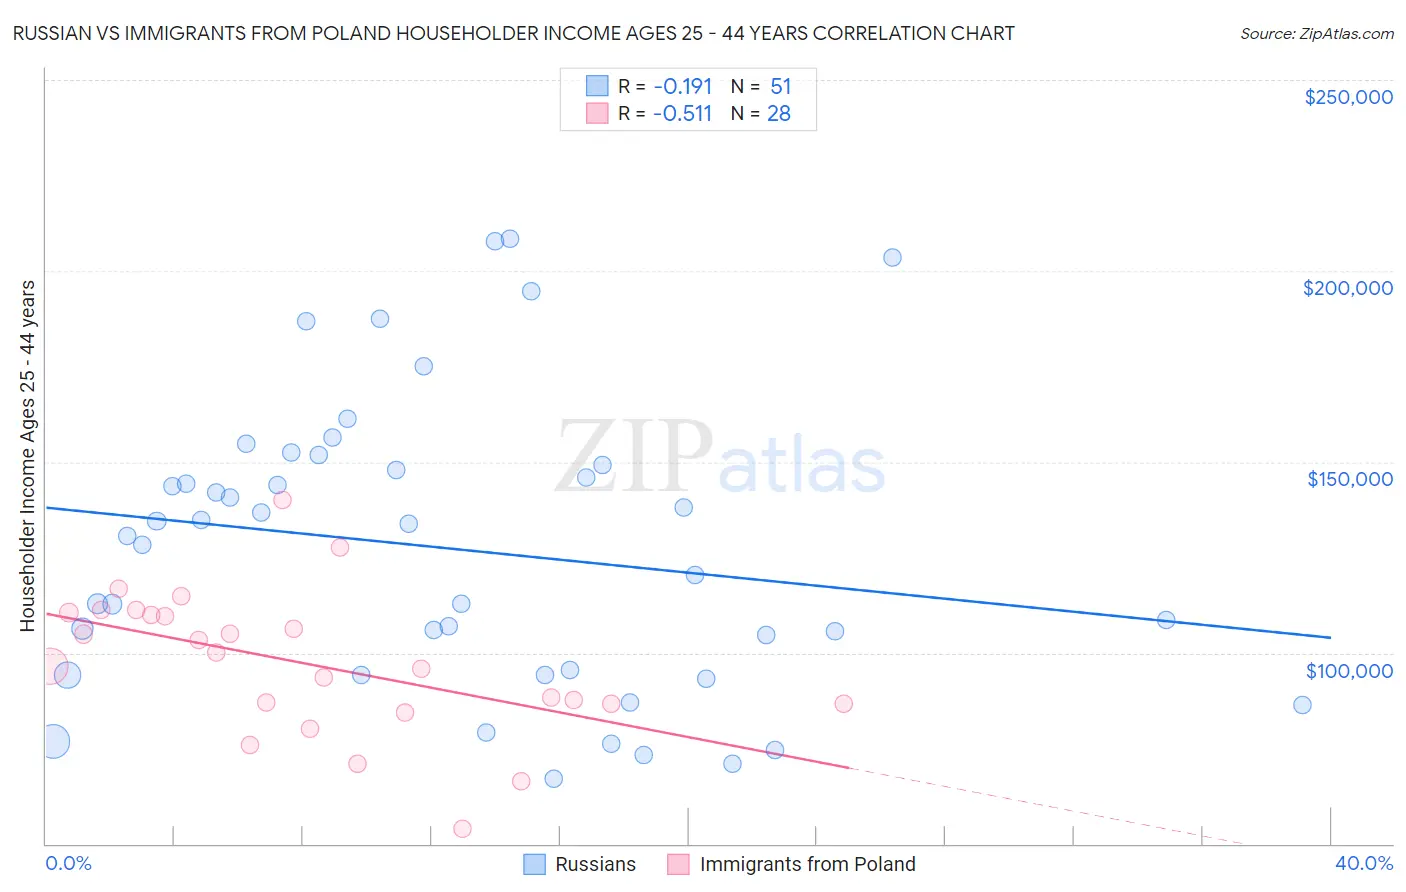 Russian vs Immigrants from Poland Householder Income Ages 25 - 44 years